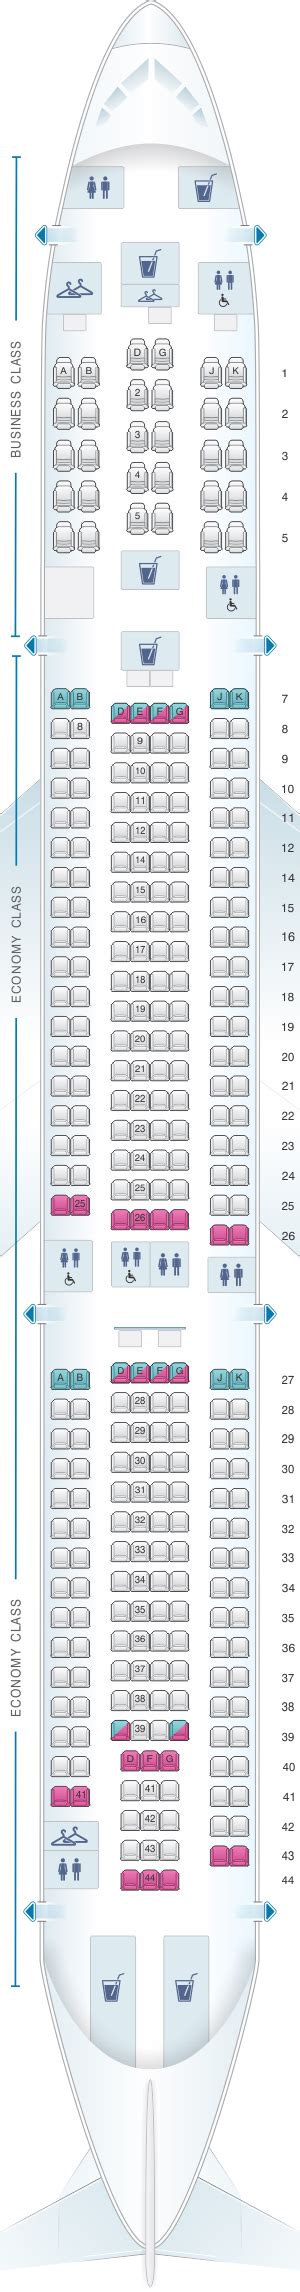 China Airlines A350 Seat Map Tutorial Pics